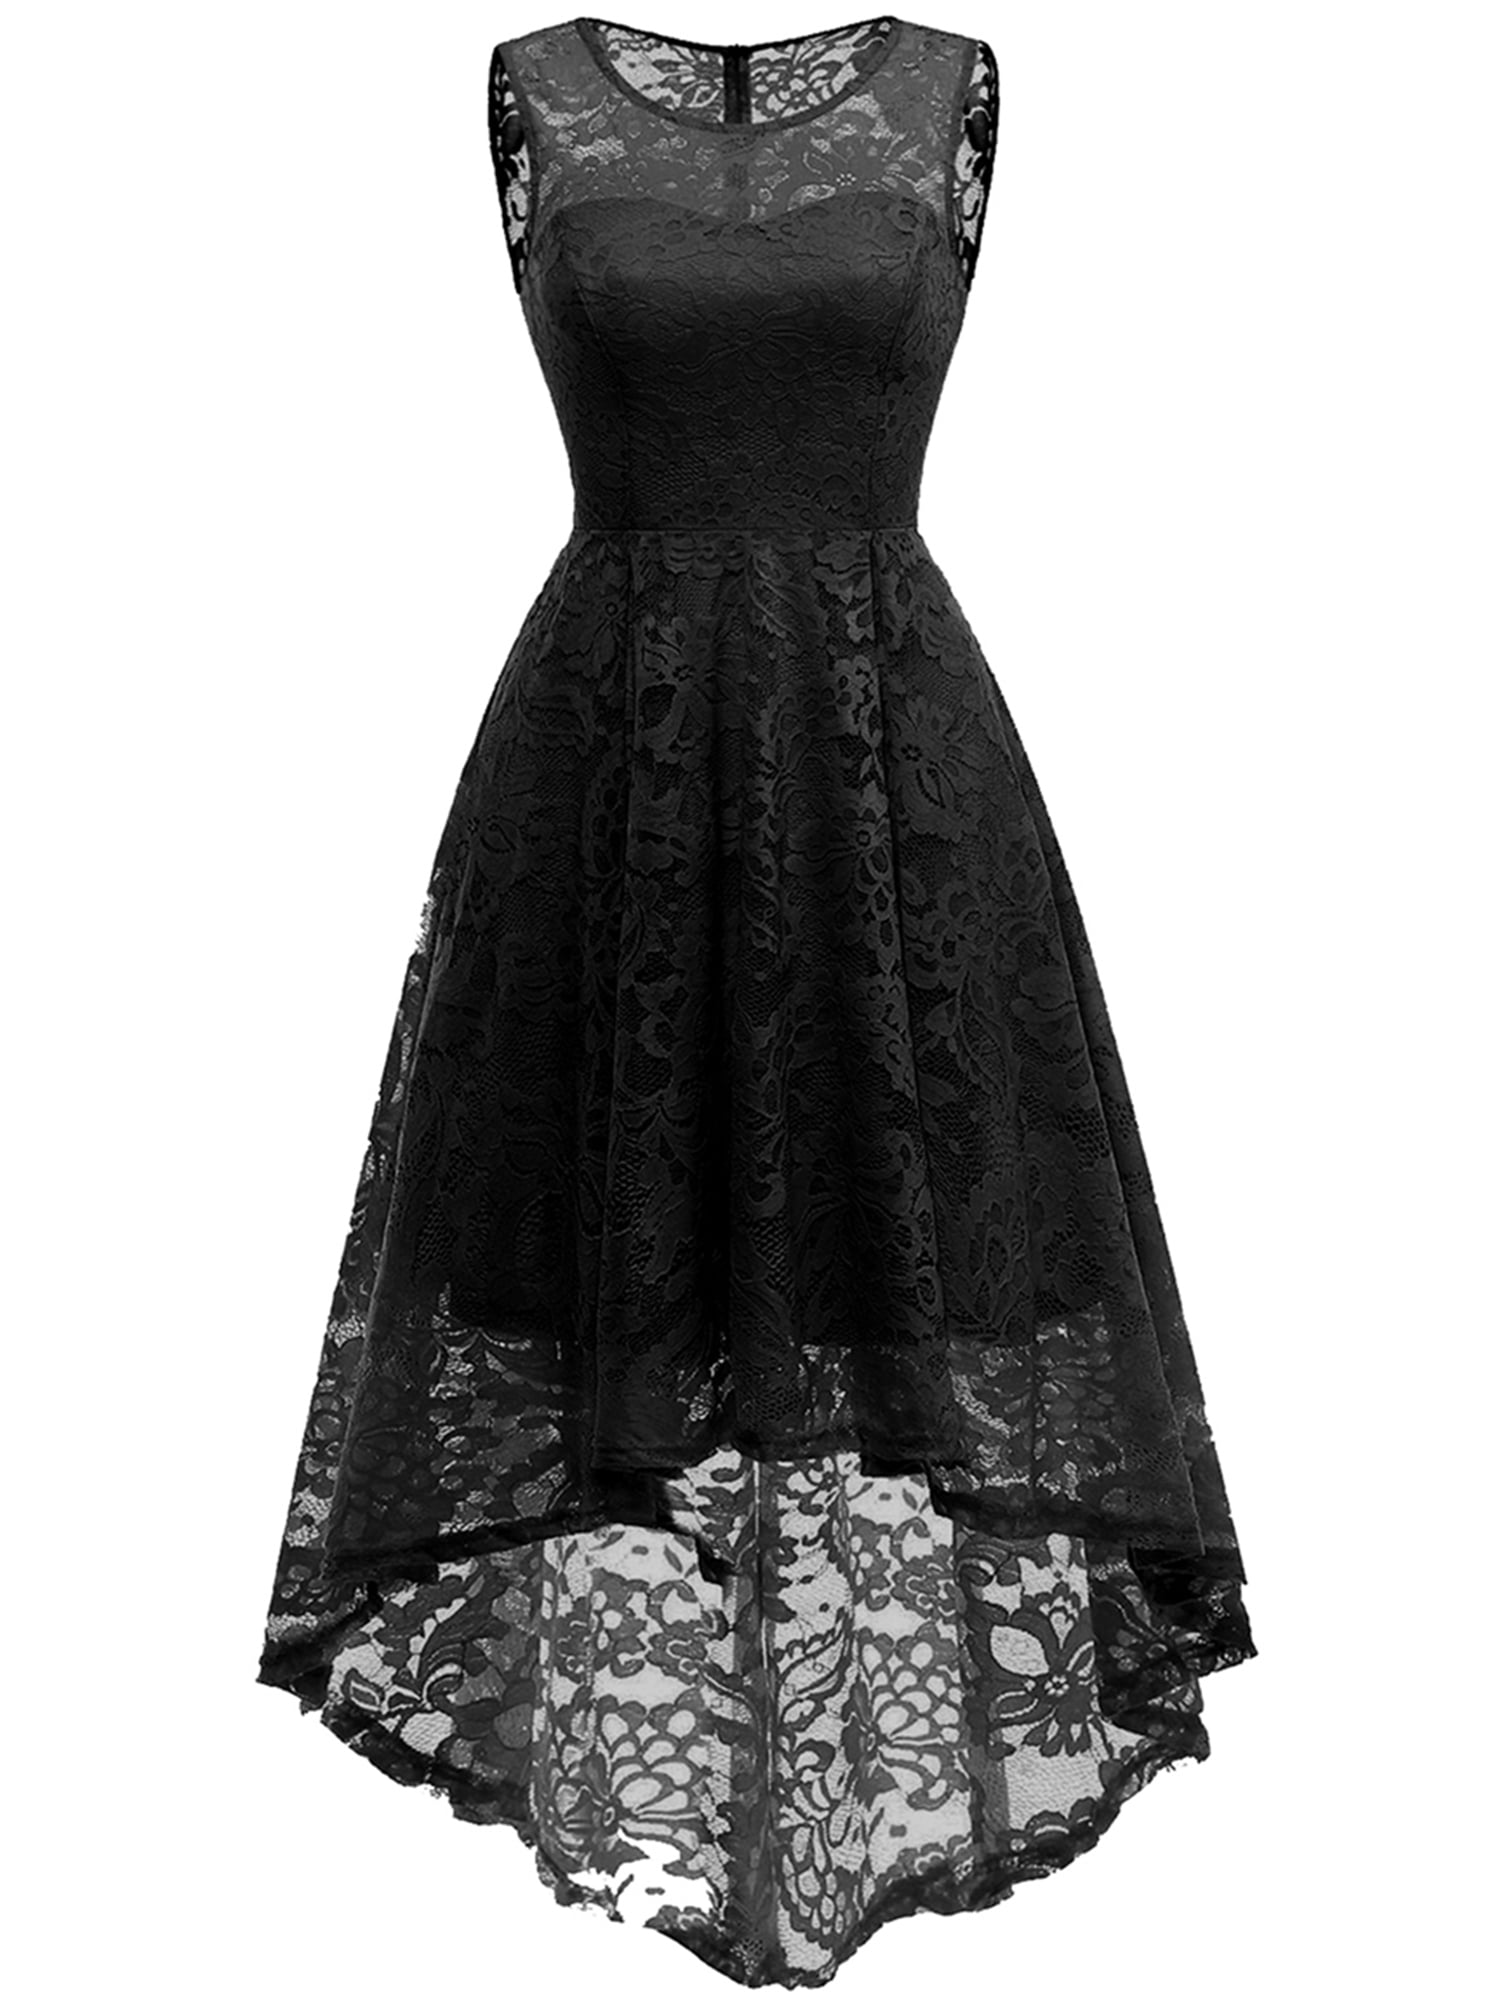 Market In The Box Women's Lace Dress Vintage Floral Sleeveless Hi-Lo ...